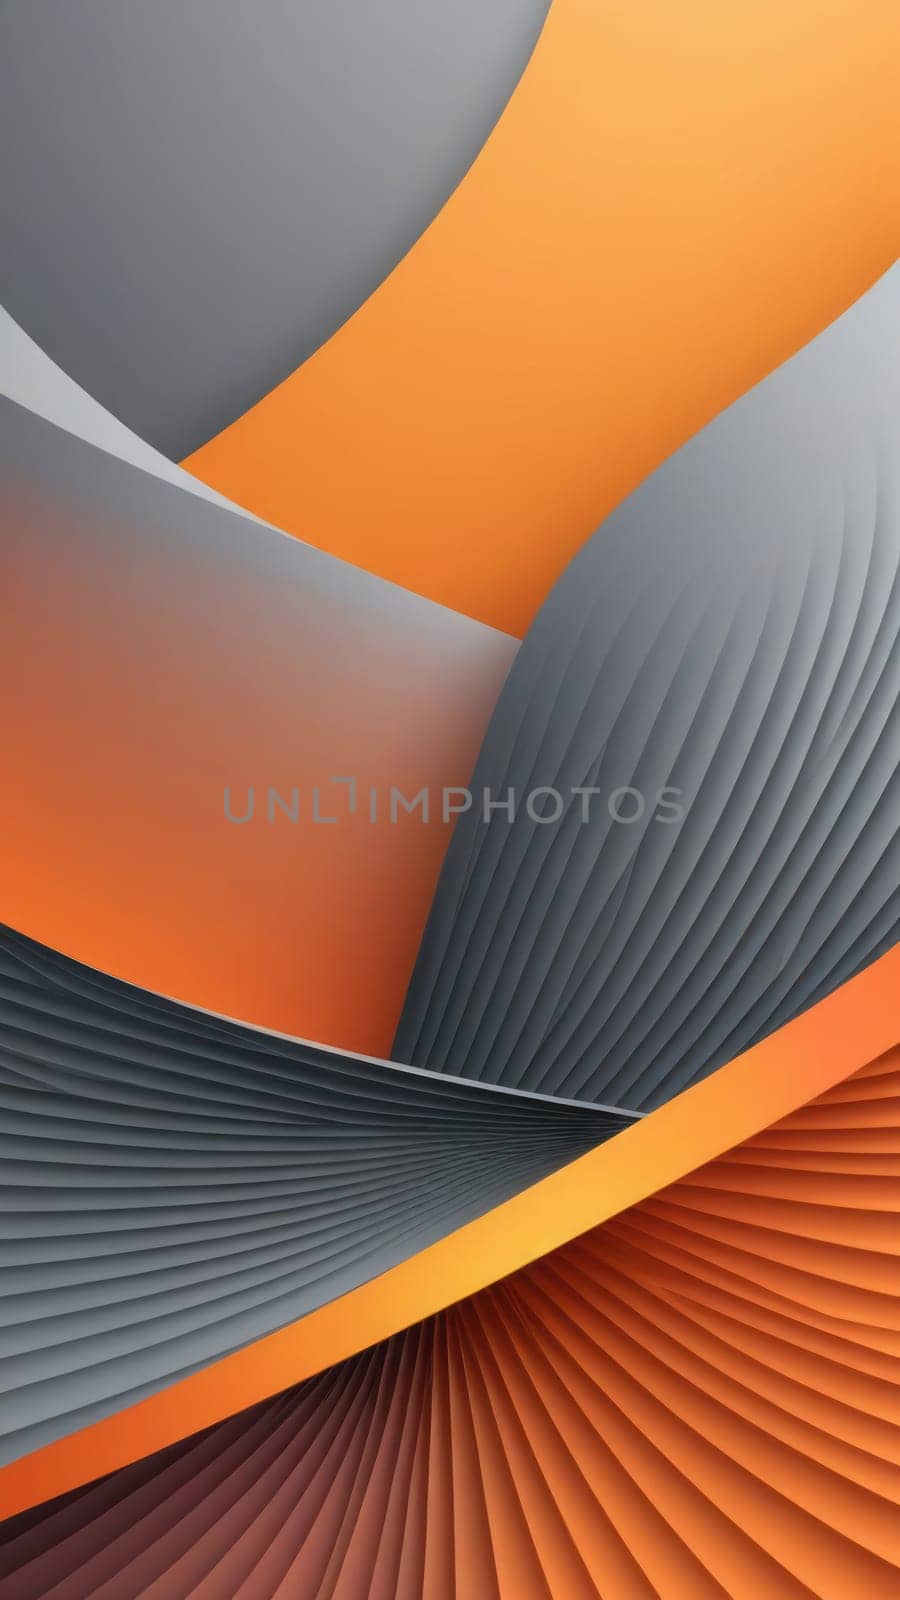 Creativity in paints from Fanned shapes and orange by nkotlyar